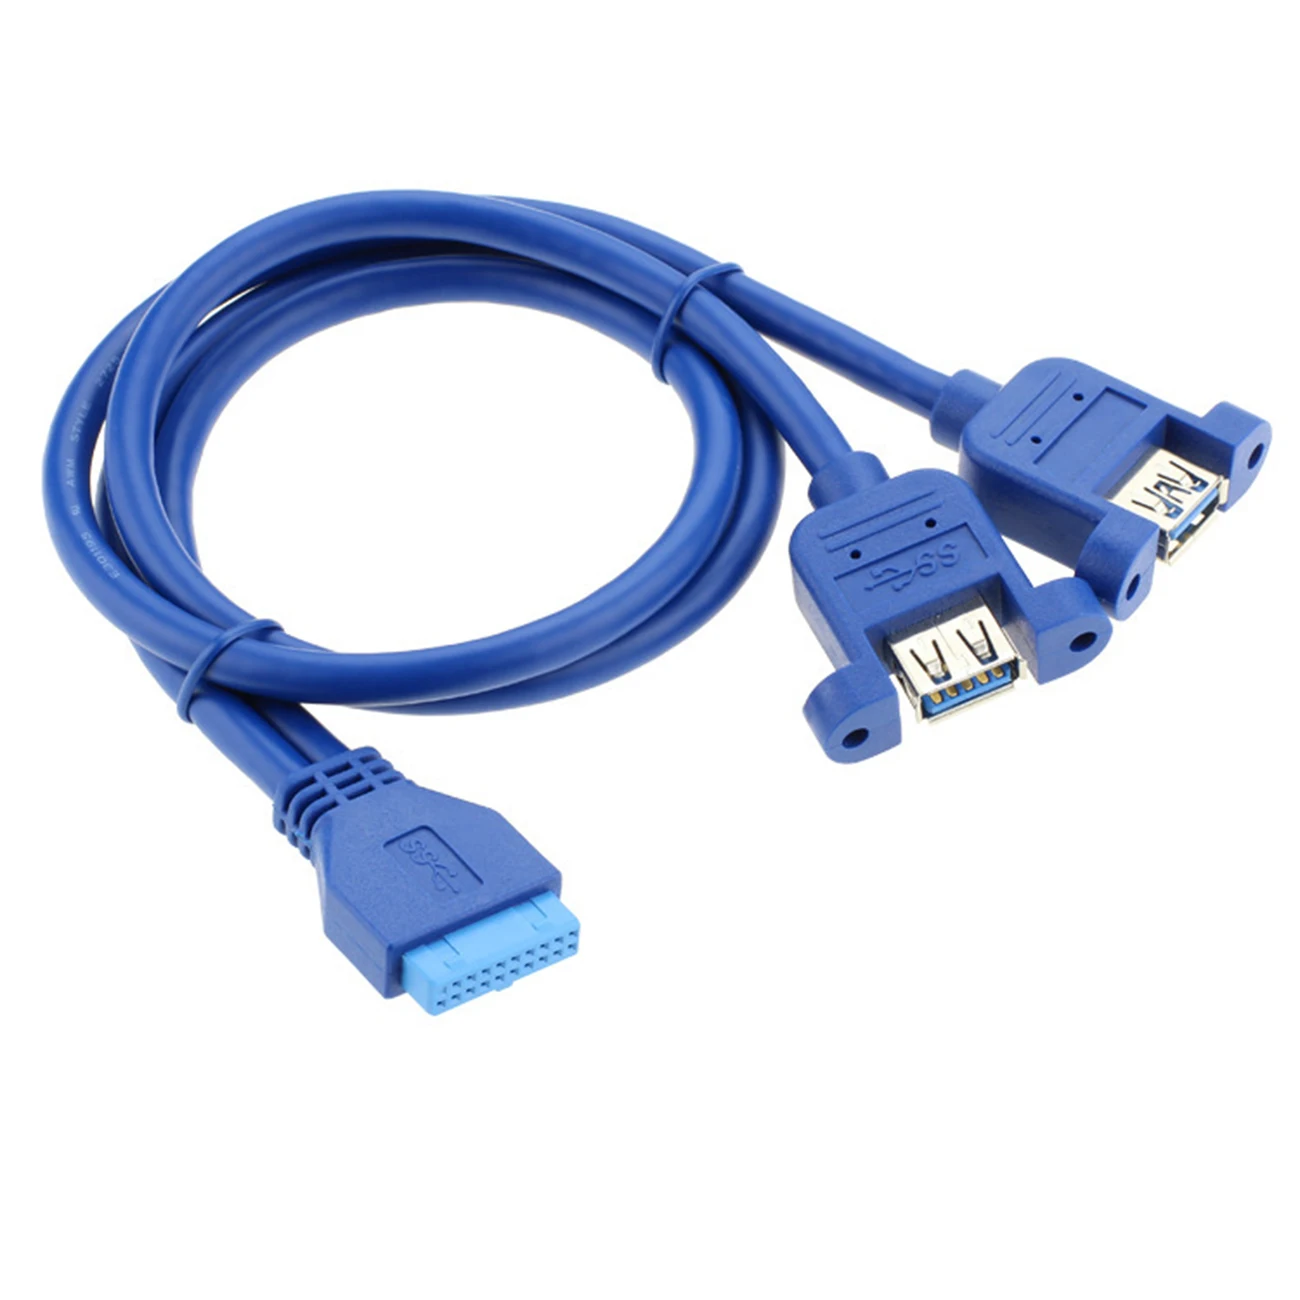 

USB 3.0 Date Cable 20Pin to Dual USB 3.0 Screw Lock Panel Mount Header Cable 0.5m for PC Computer Case Internal Mainboard